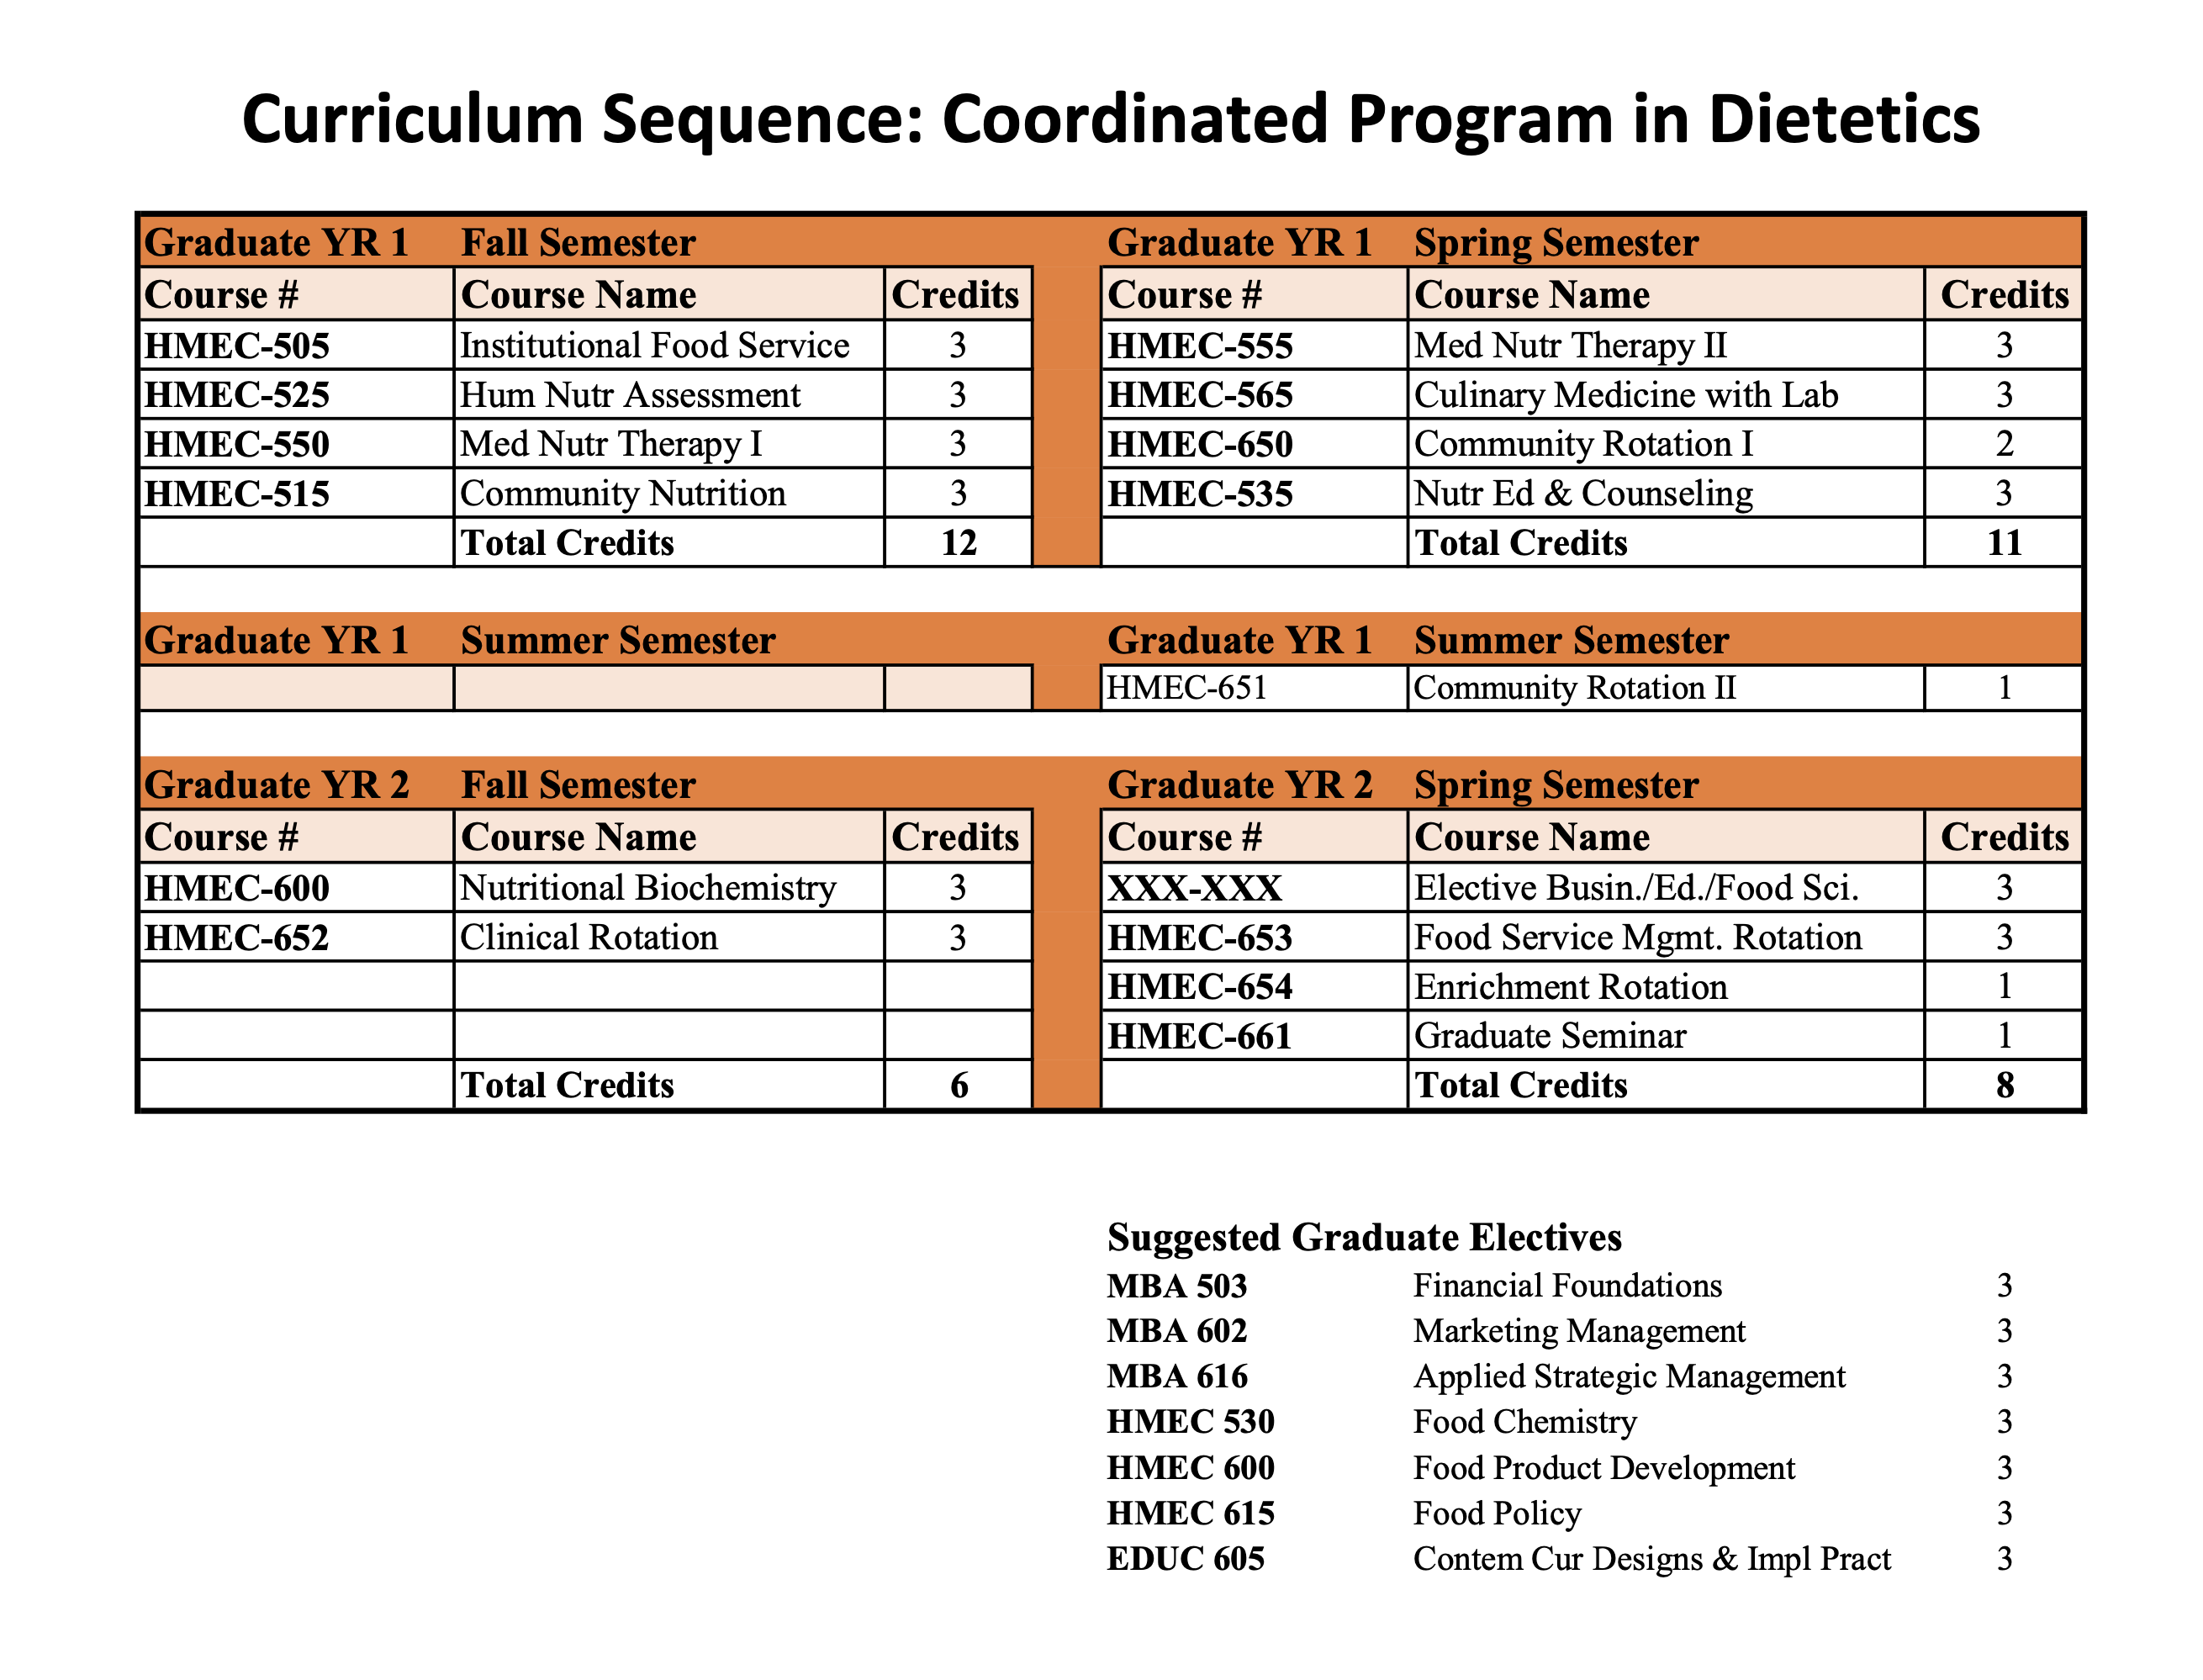 Suggested Course Sequence for Coordinated Program in Dietetics